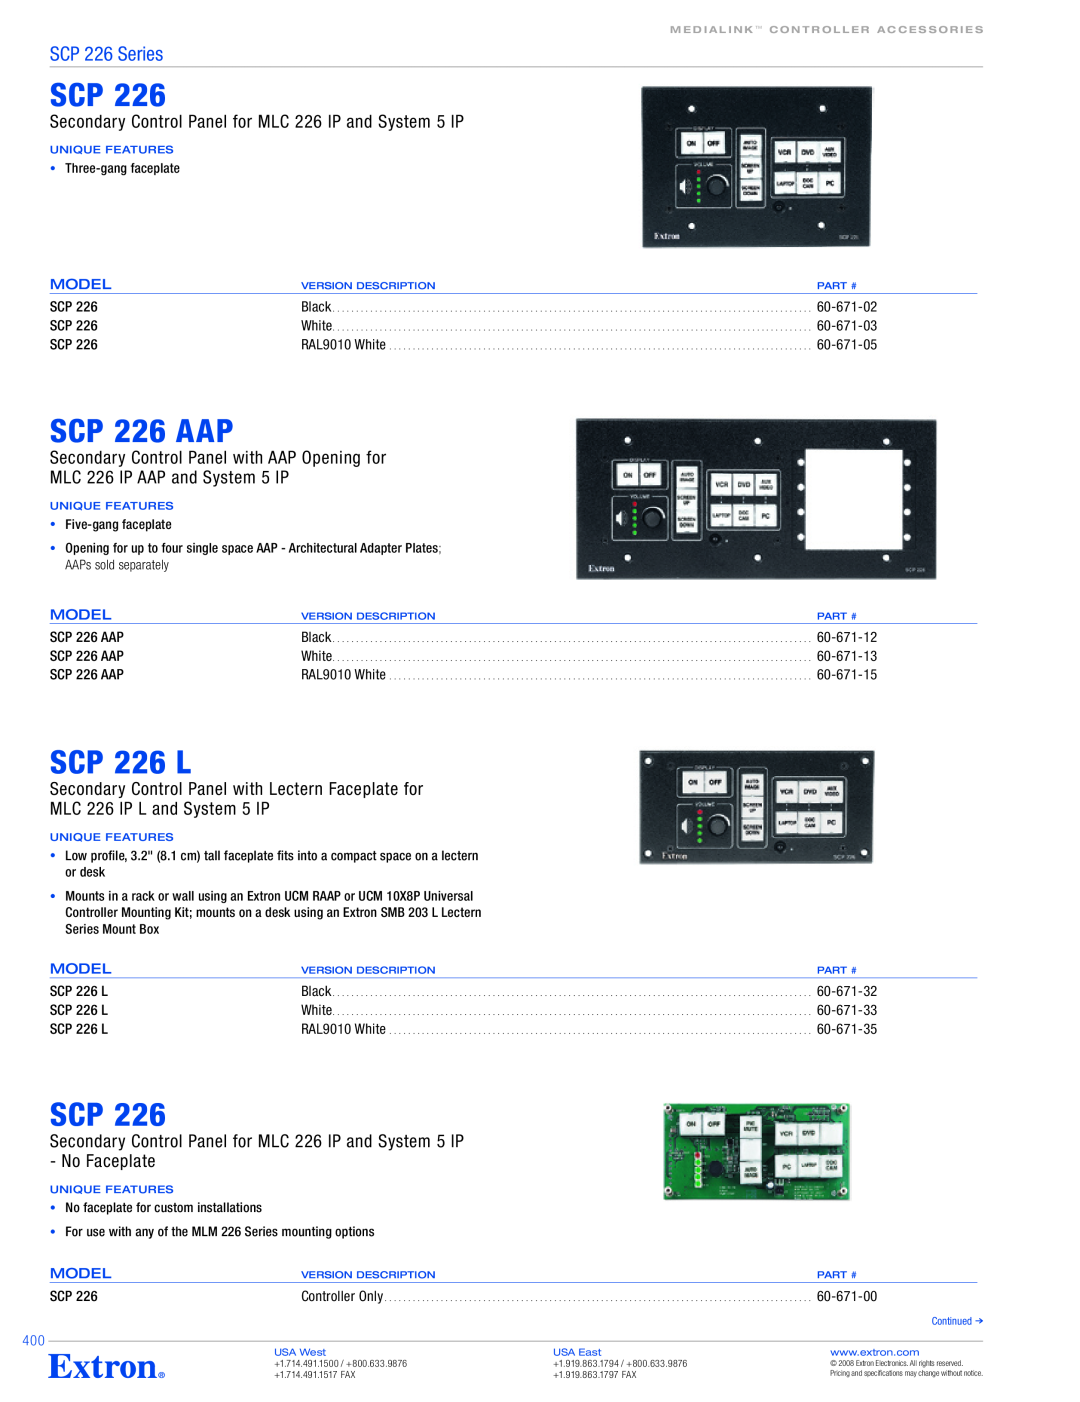 Extron electronic SCP 226 Series SCP 226 AAP, SCP 226 L, Secondary Control Panel for MLC 226 IP and System 5 IP, Model 